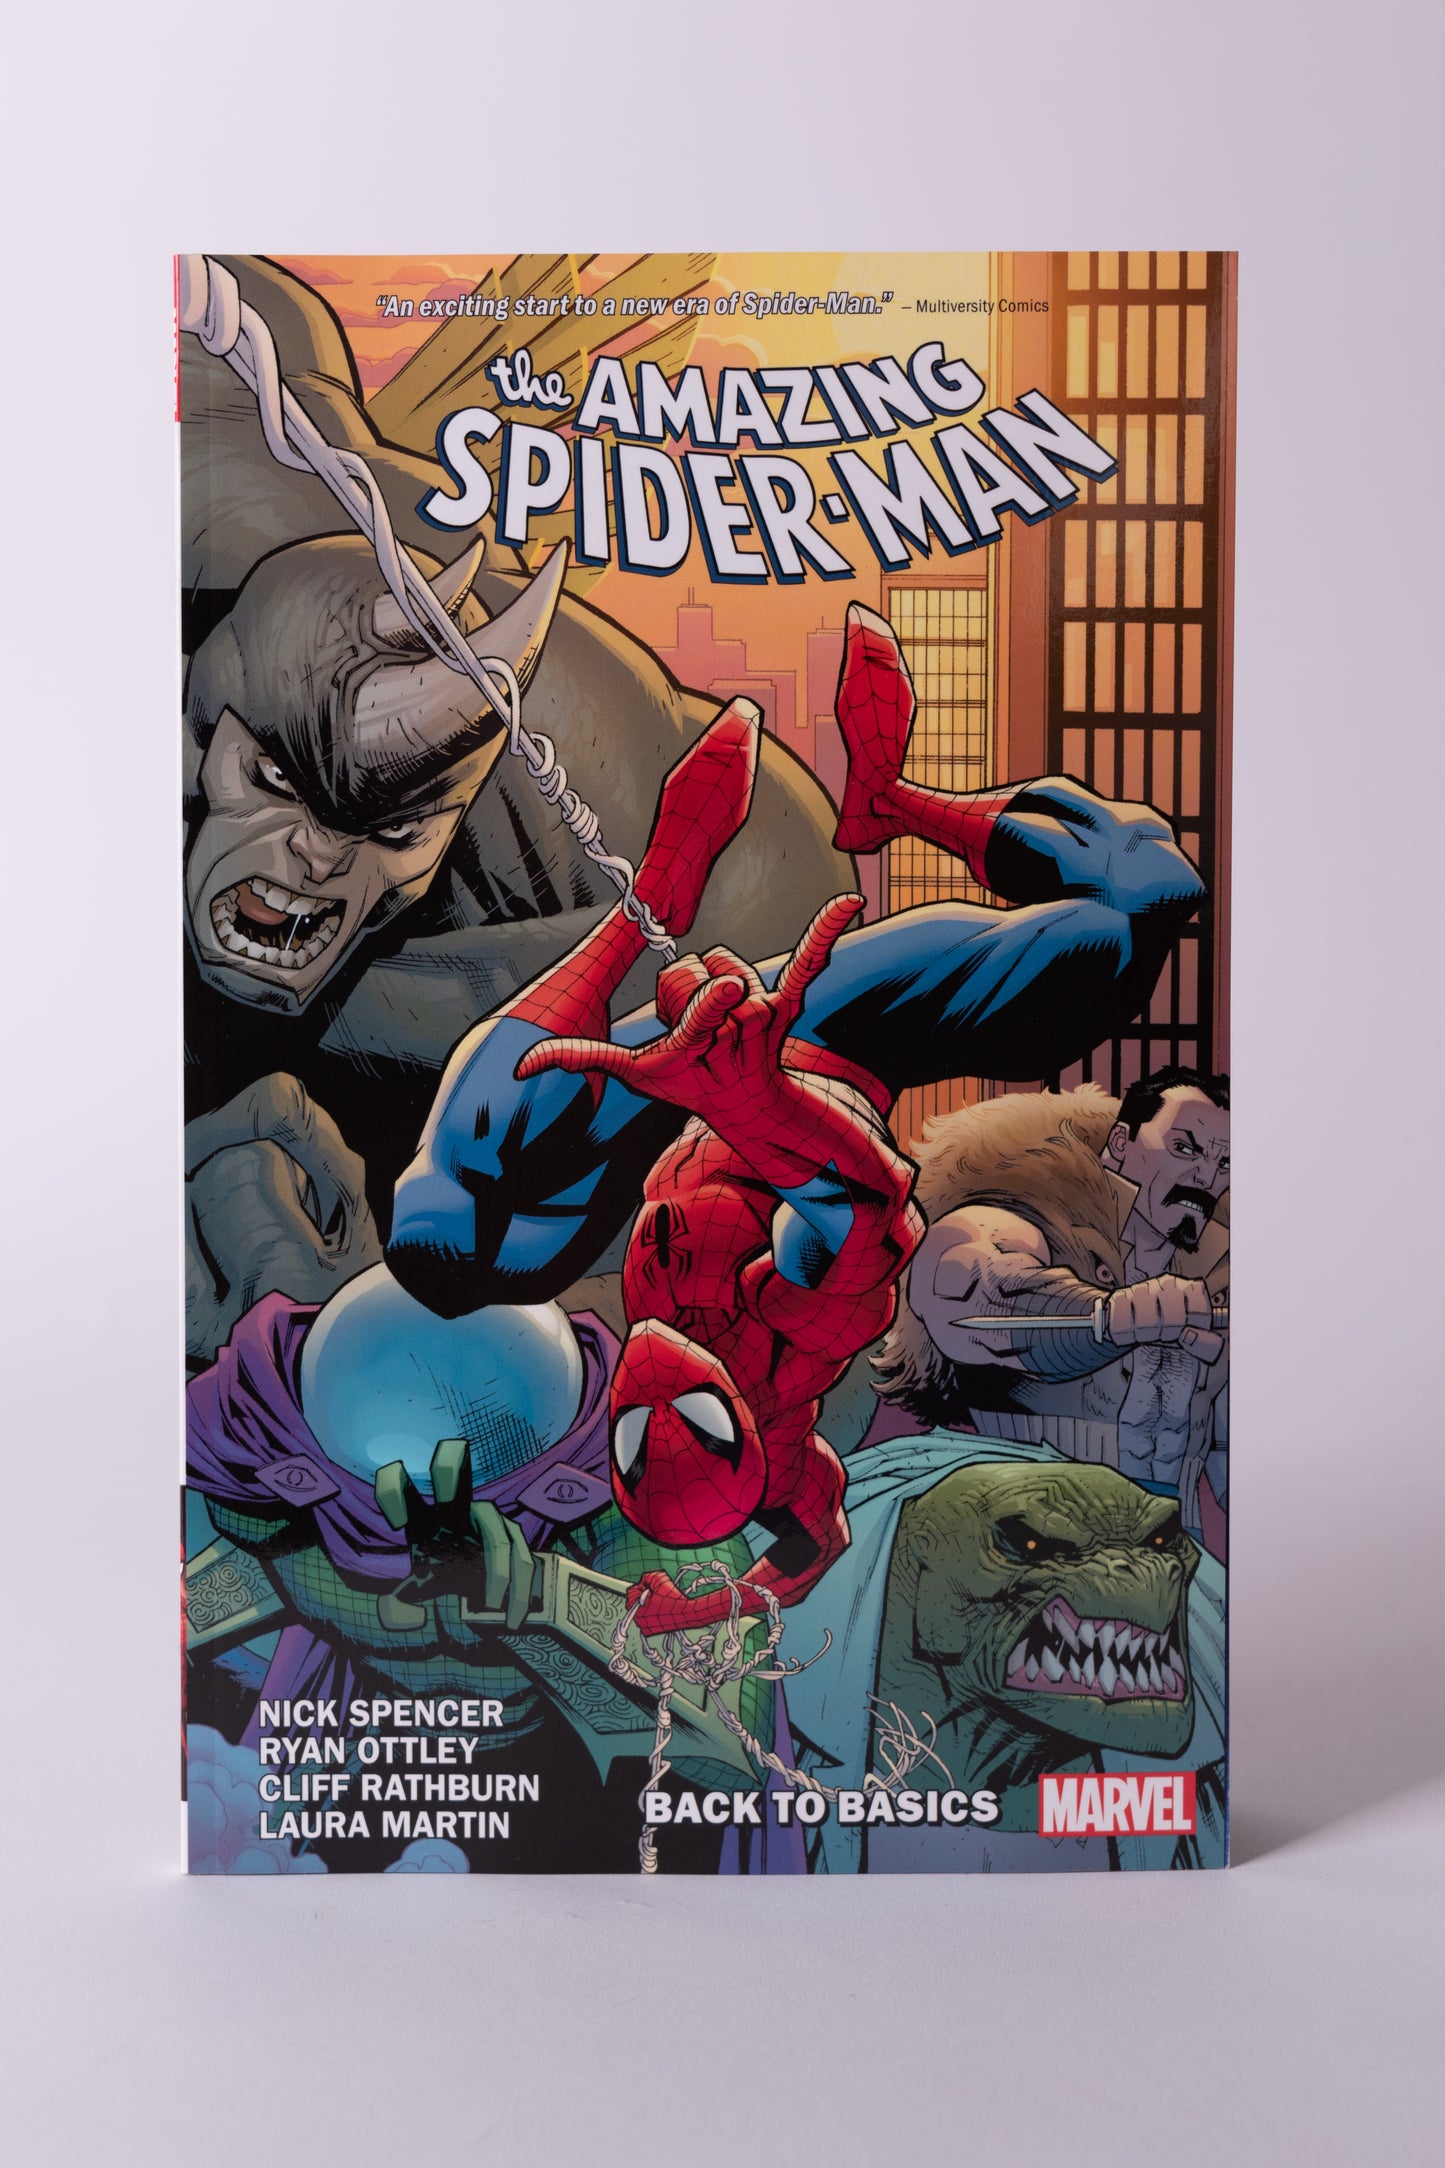 AMAZING SPIDERMAN BY NICK SPENCER VOL 01 BACK TO BASICS